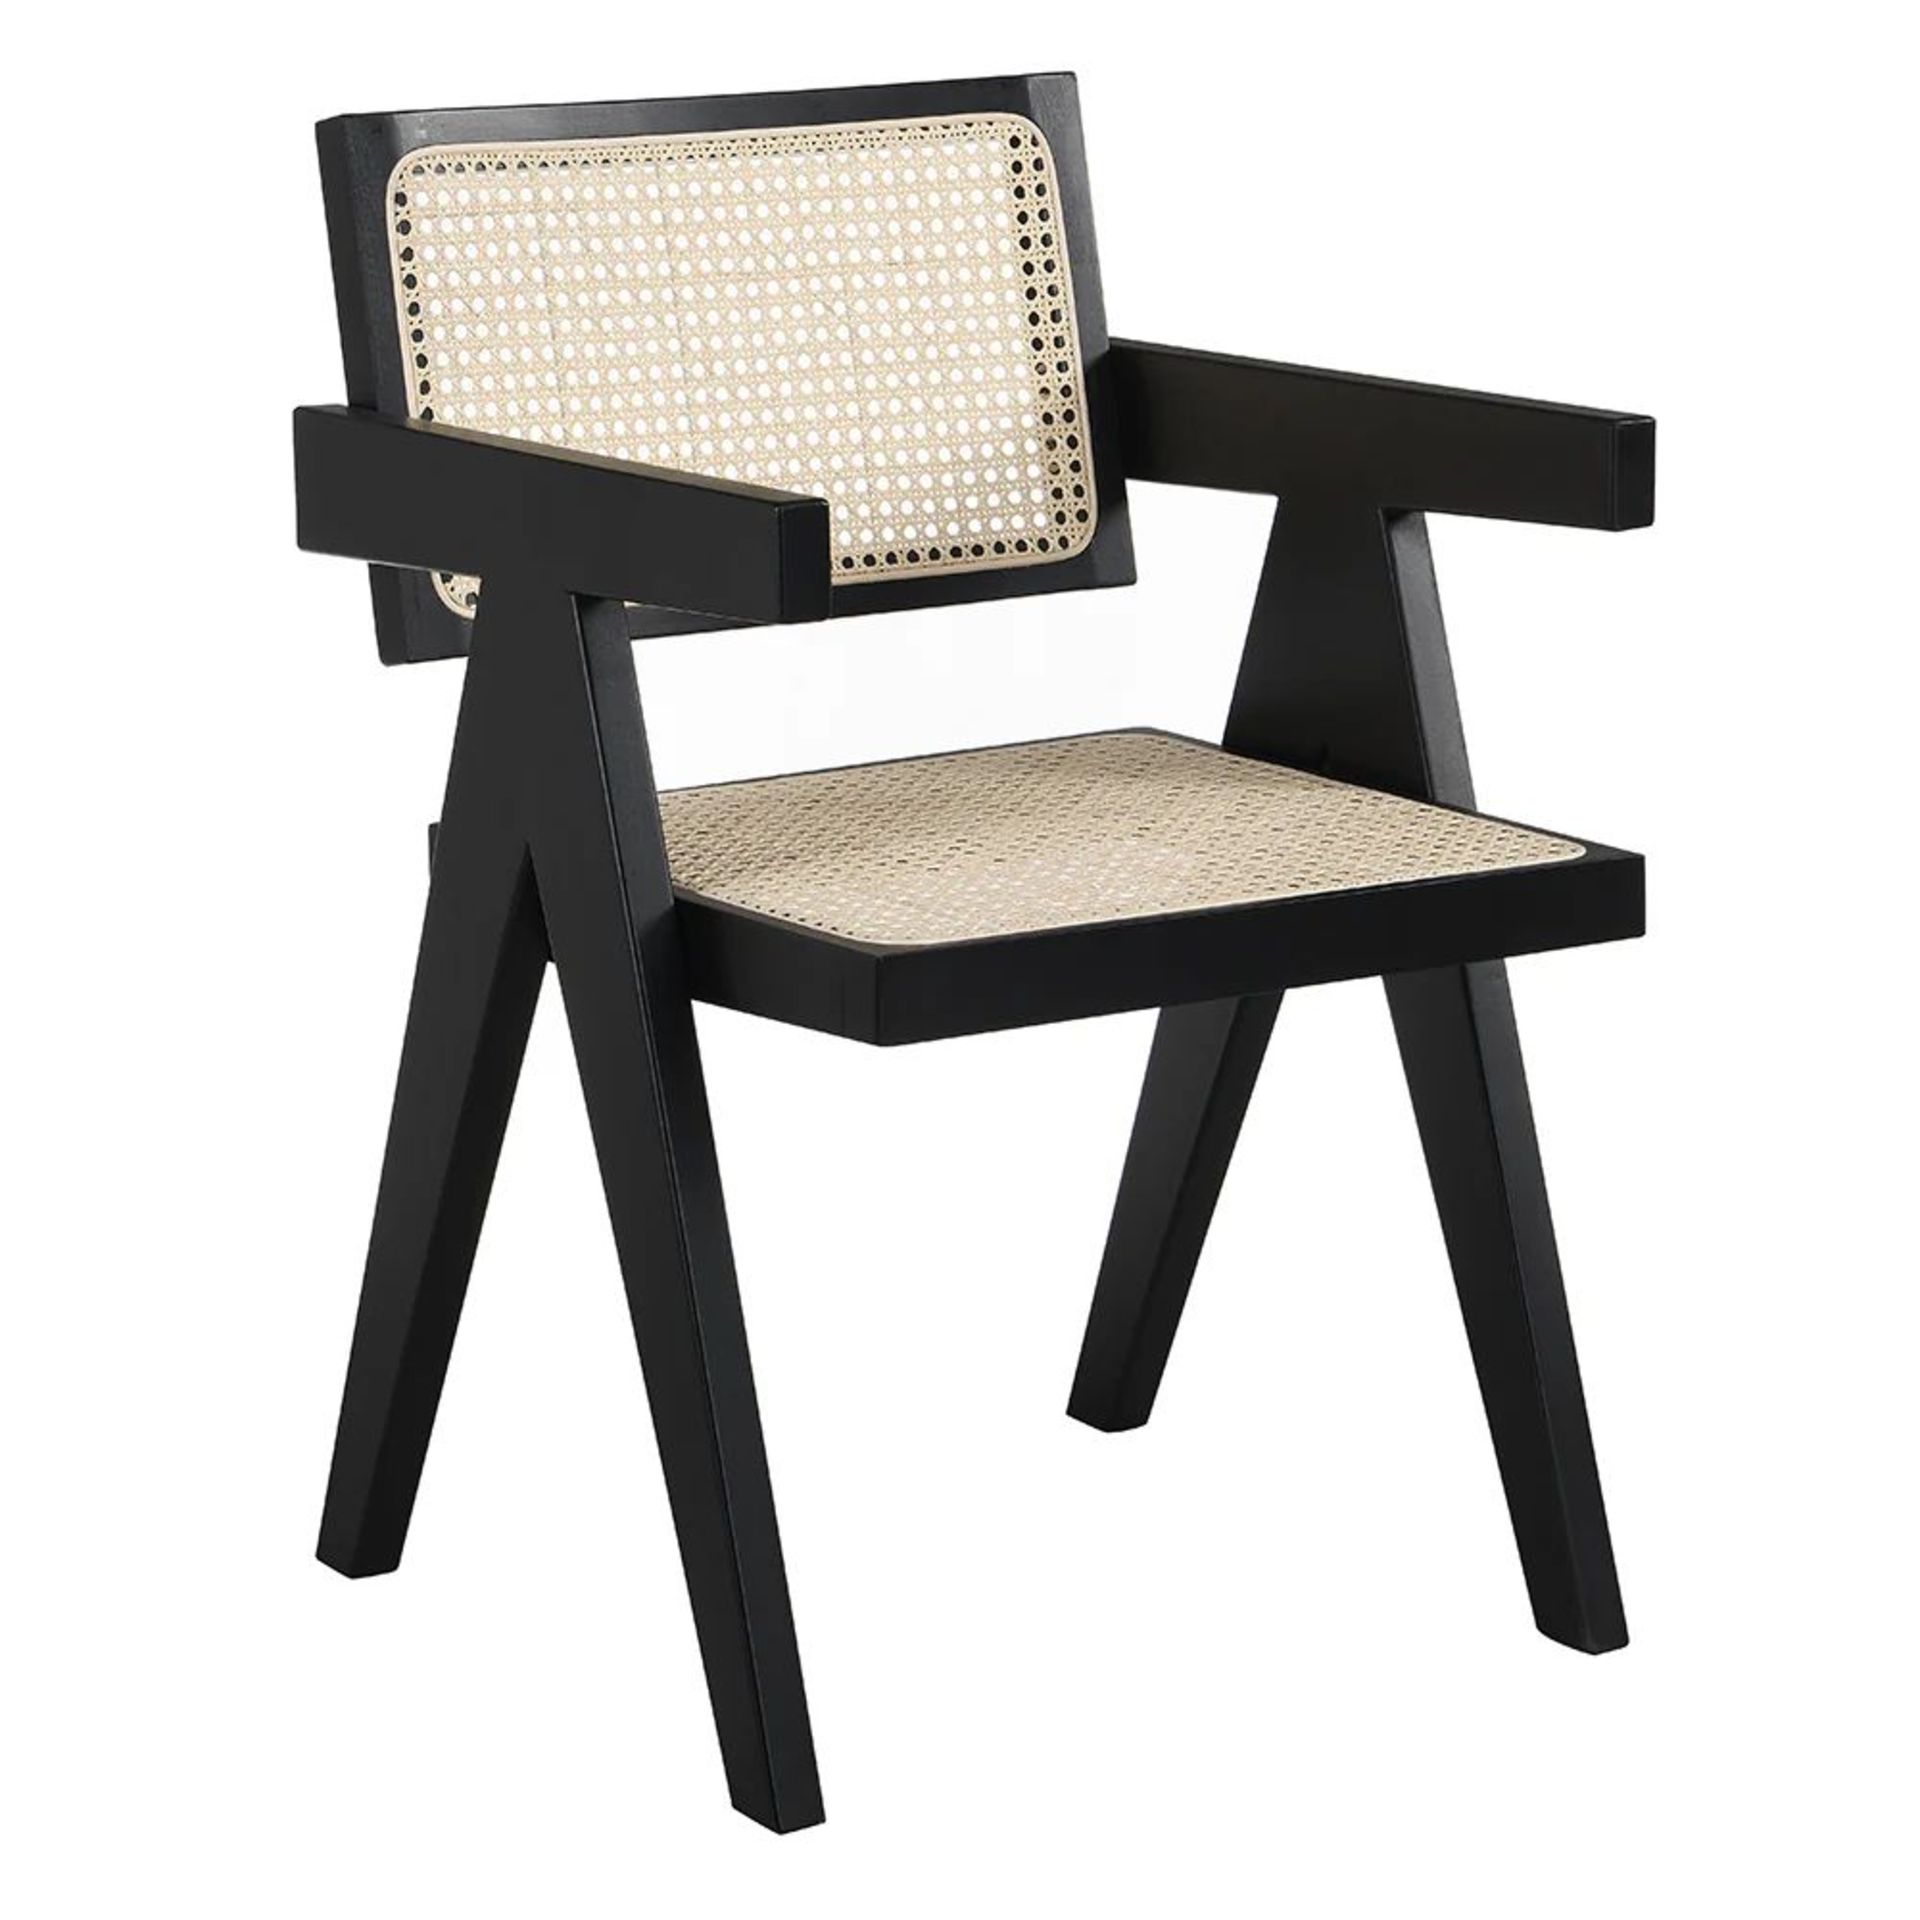 Jeanne Black Colour Cane Rattan Solid Beech Wood Dining Chair. - R19.6. RRP £239.99. The cane rattan - Image 2 of 2